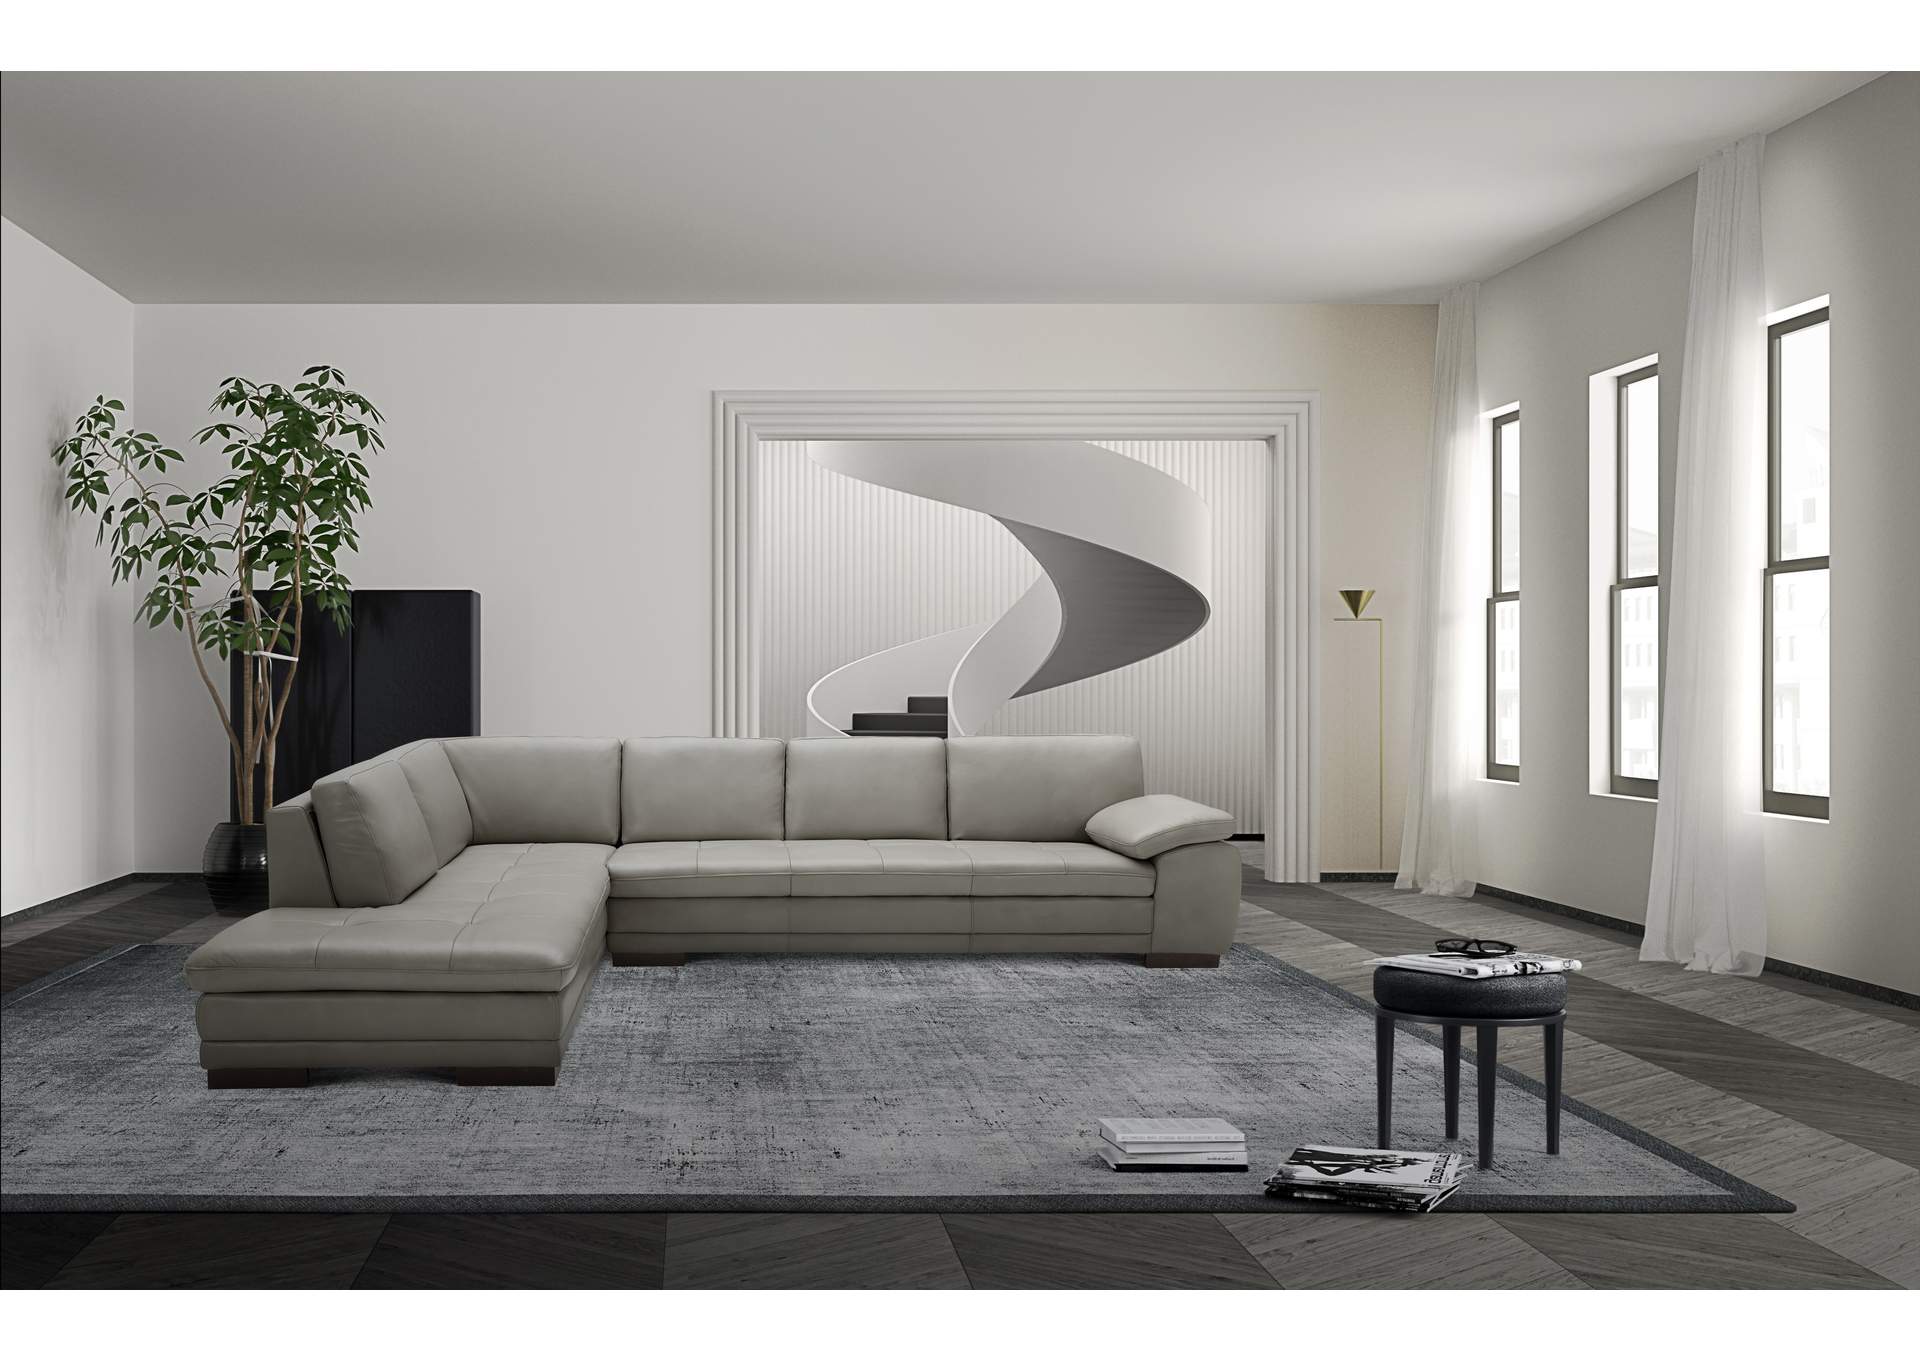 625 Italian Leather Sectional Grey in Left Hand Facing,J&M Furniture